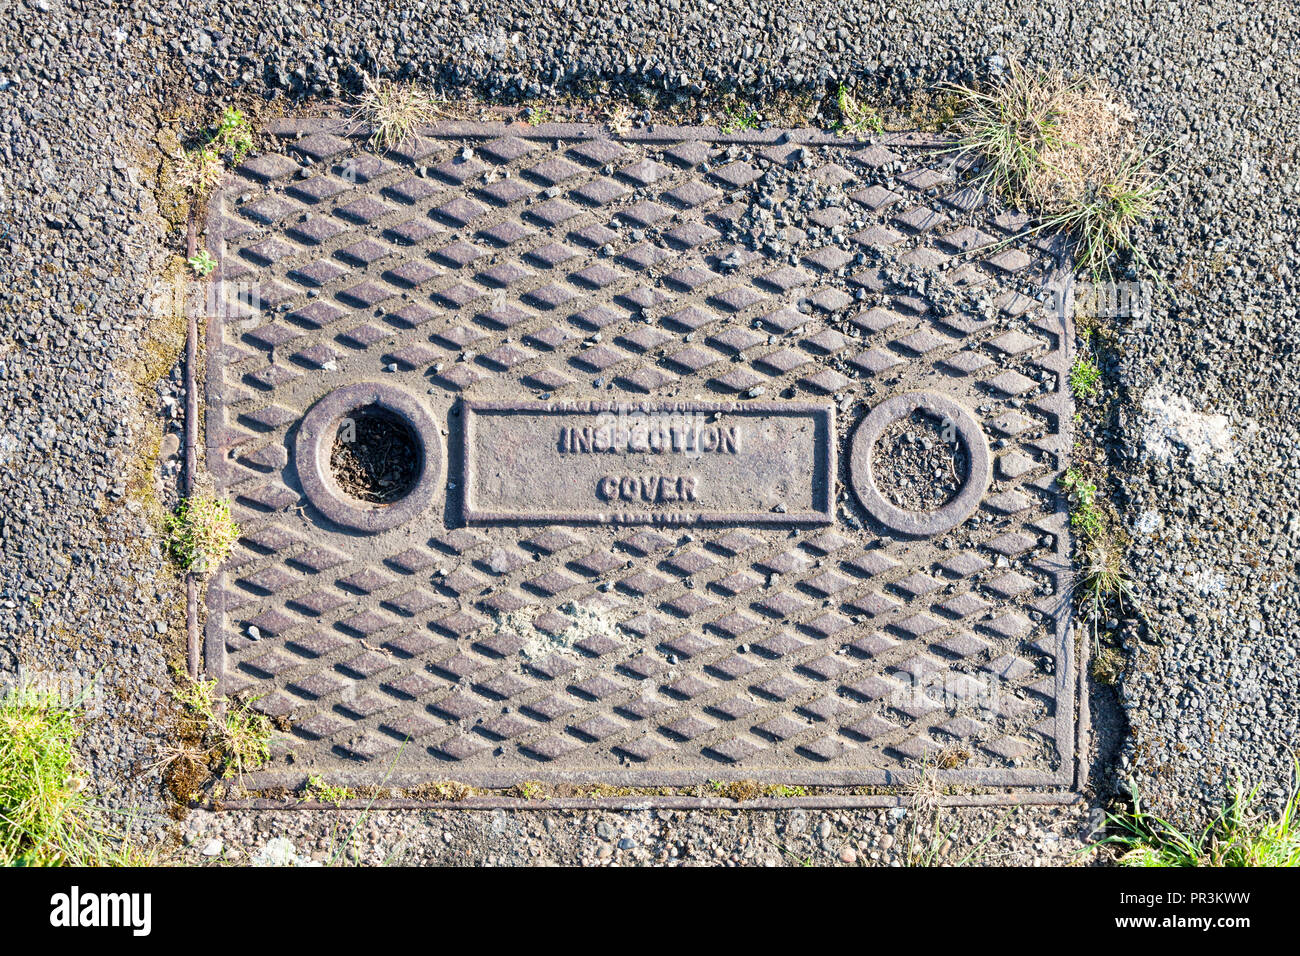 Manhole cover or inspection chamber cover on a path, Nottingham, England, UK Stock Photo